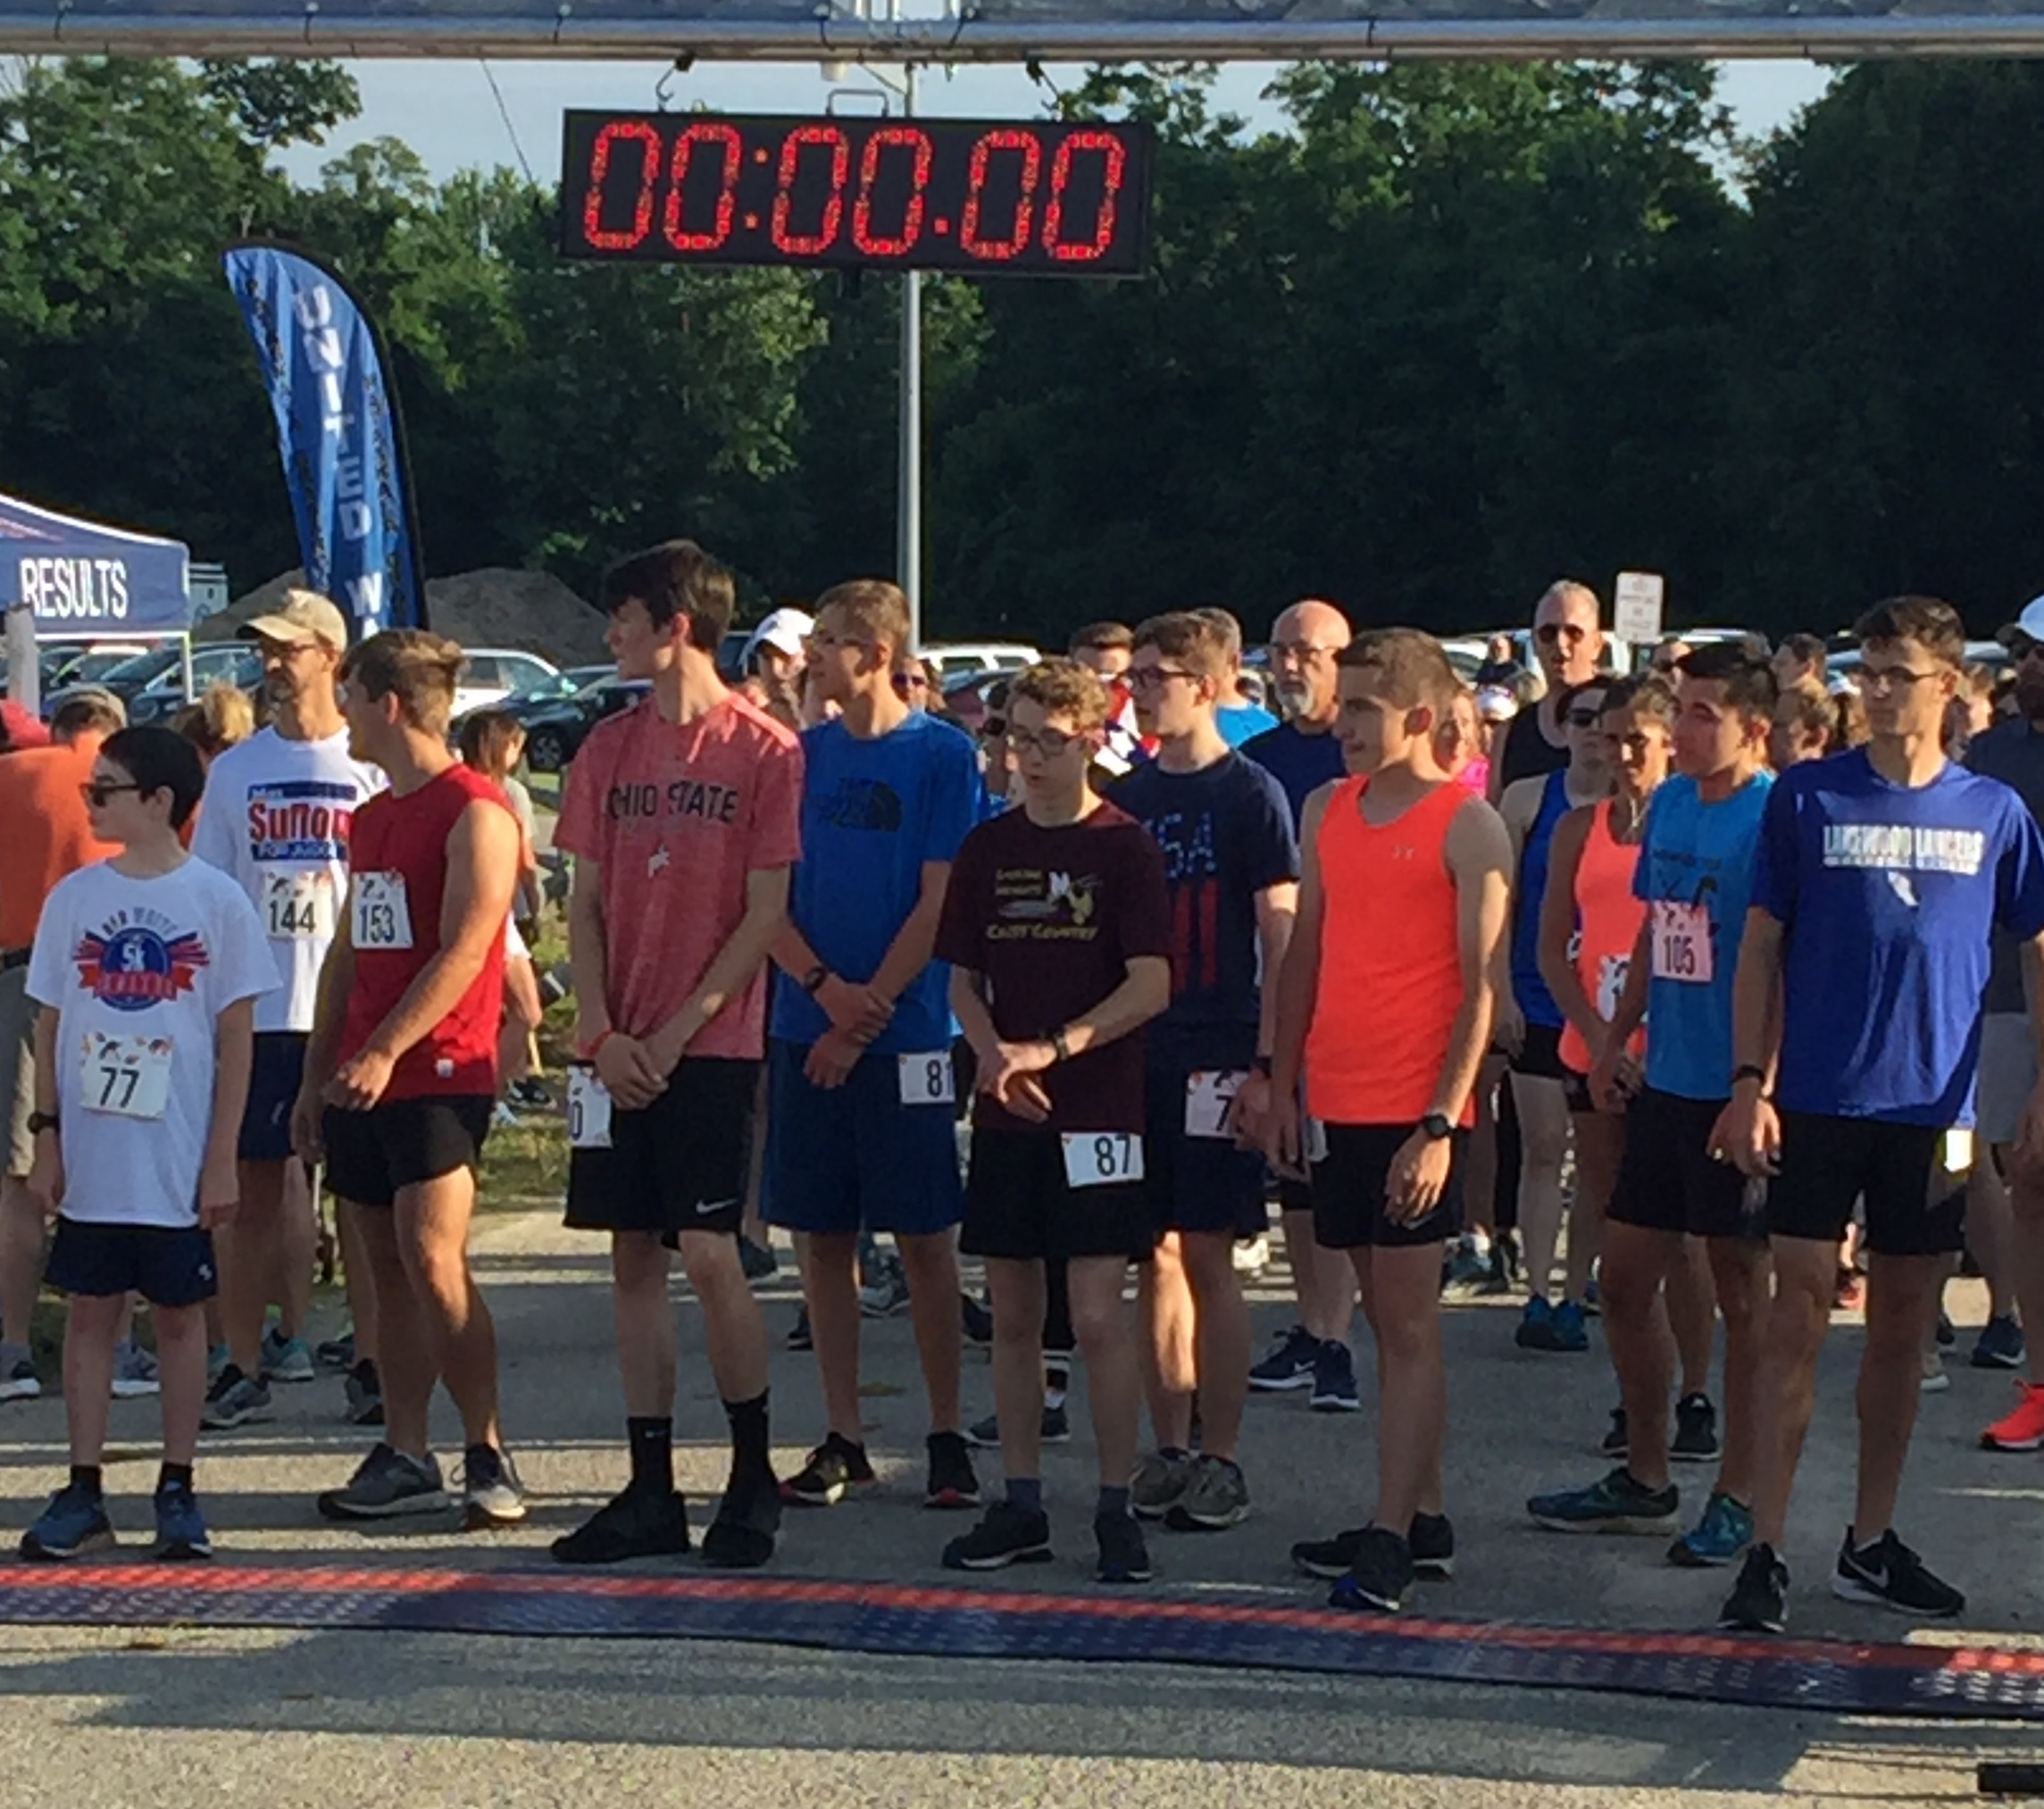 Chip Timed 5k Race Start - Ohio Race Timing & Event Management